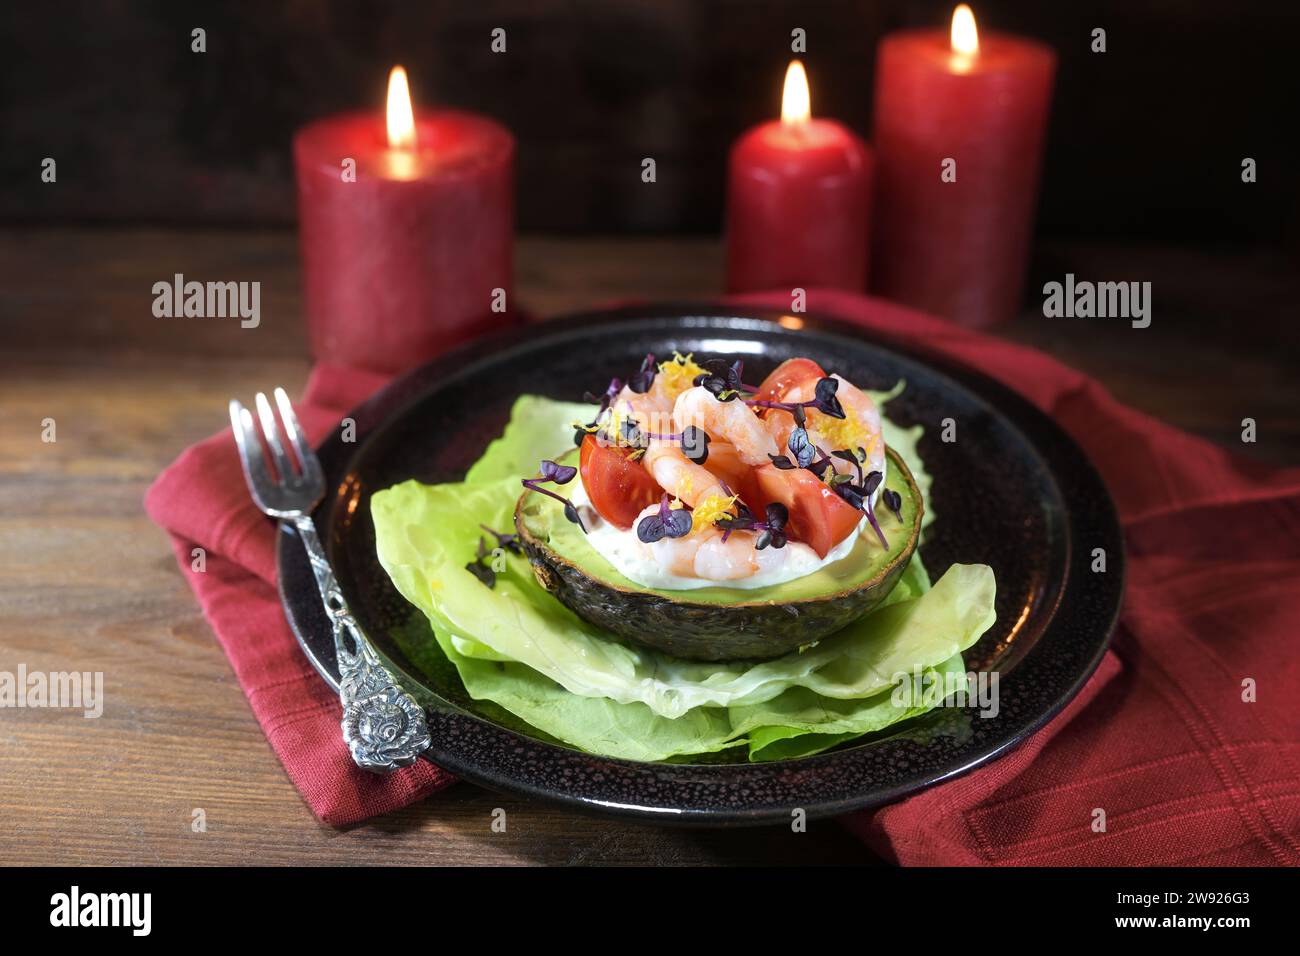 Halved avocado filled with shrimps, tomatoes and mayonnaise on a black plate, red candles and napkin, dark rustic wooden background, festive holiday a Stock Photo